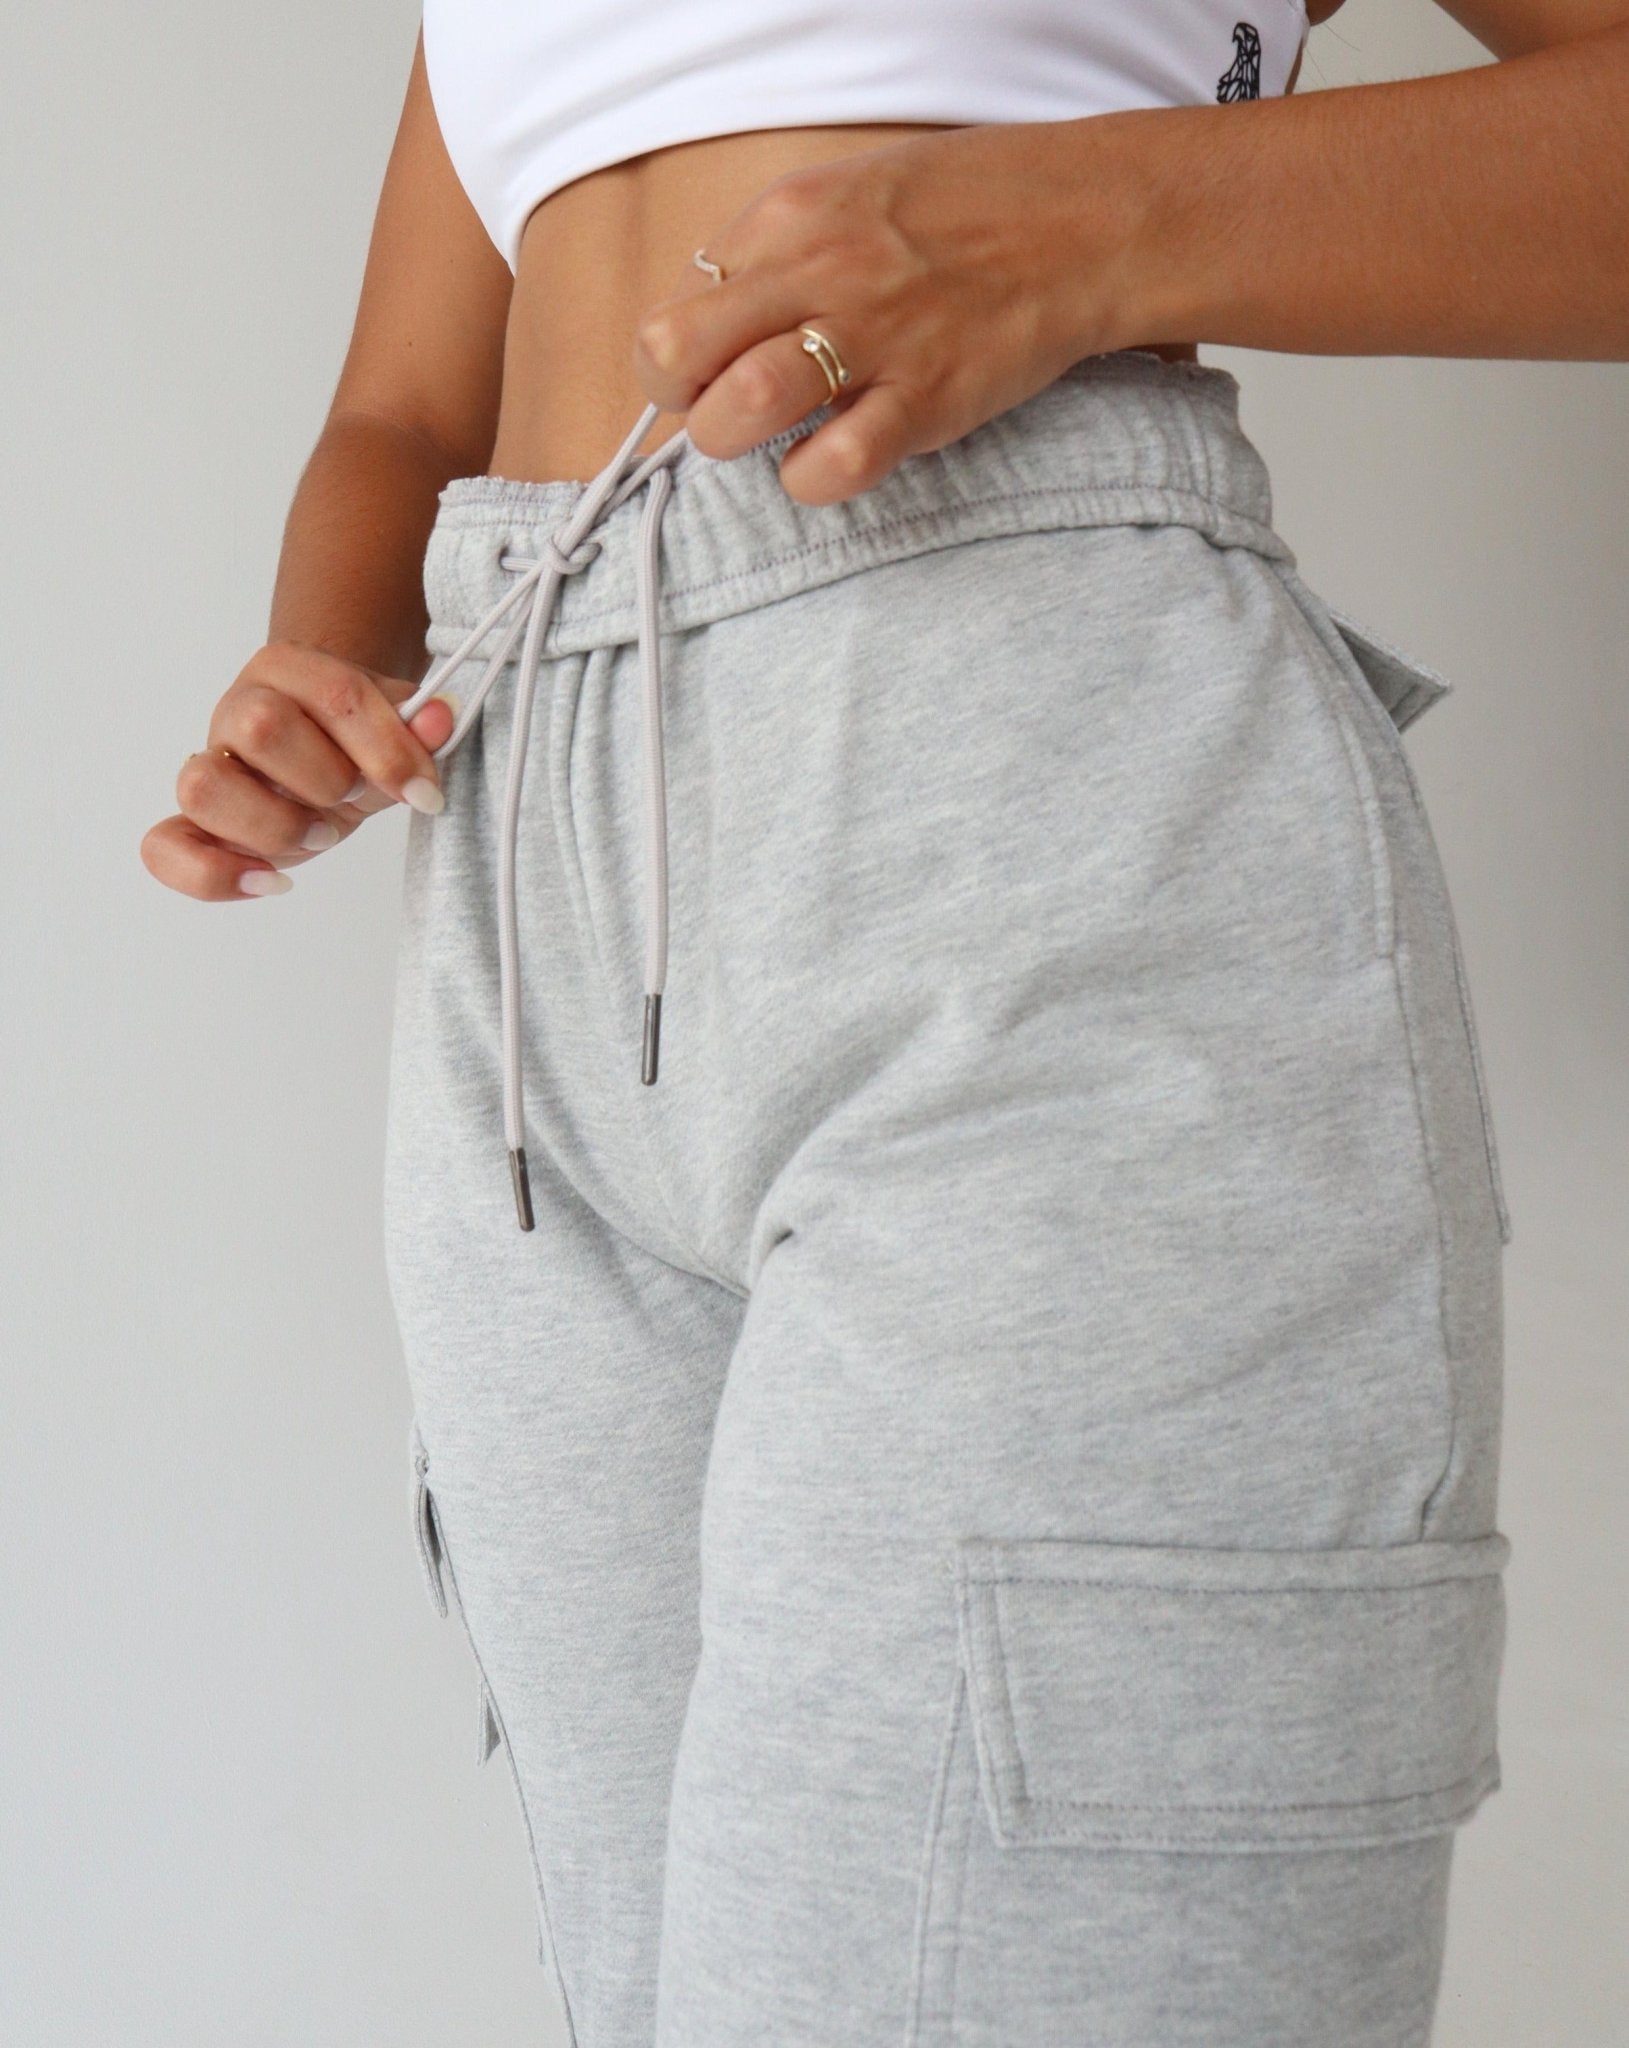 CMFRT Cargo Sweatpants - HEATHER GREY - LIBERA Fitness Apparel. Upgrade your loungewear with versatile and stylish cargo sweatpants. Experience comfort and convenience with functional pockets and an adjustable waistband.